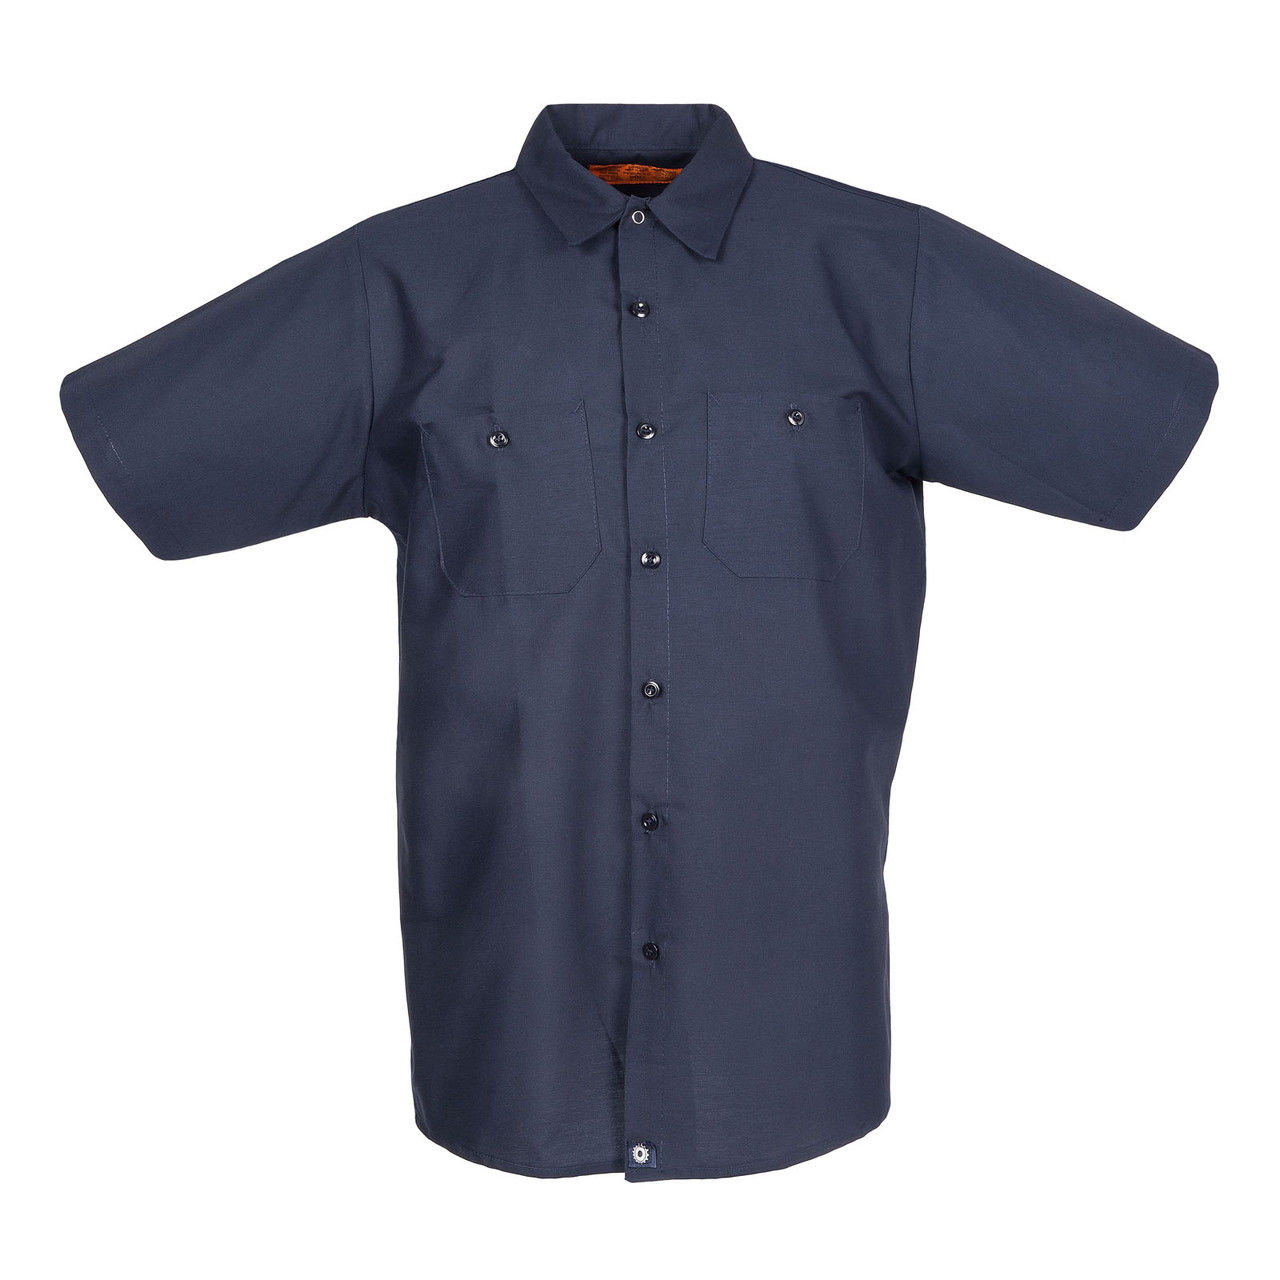 What is the length size on 2xl shirts ?